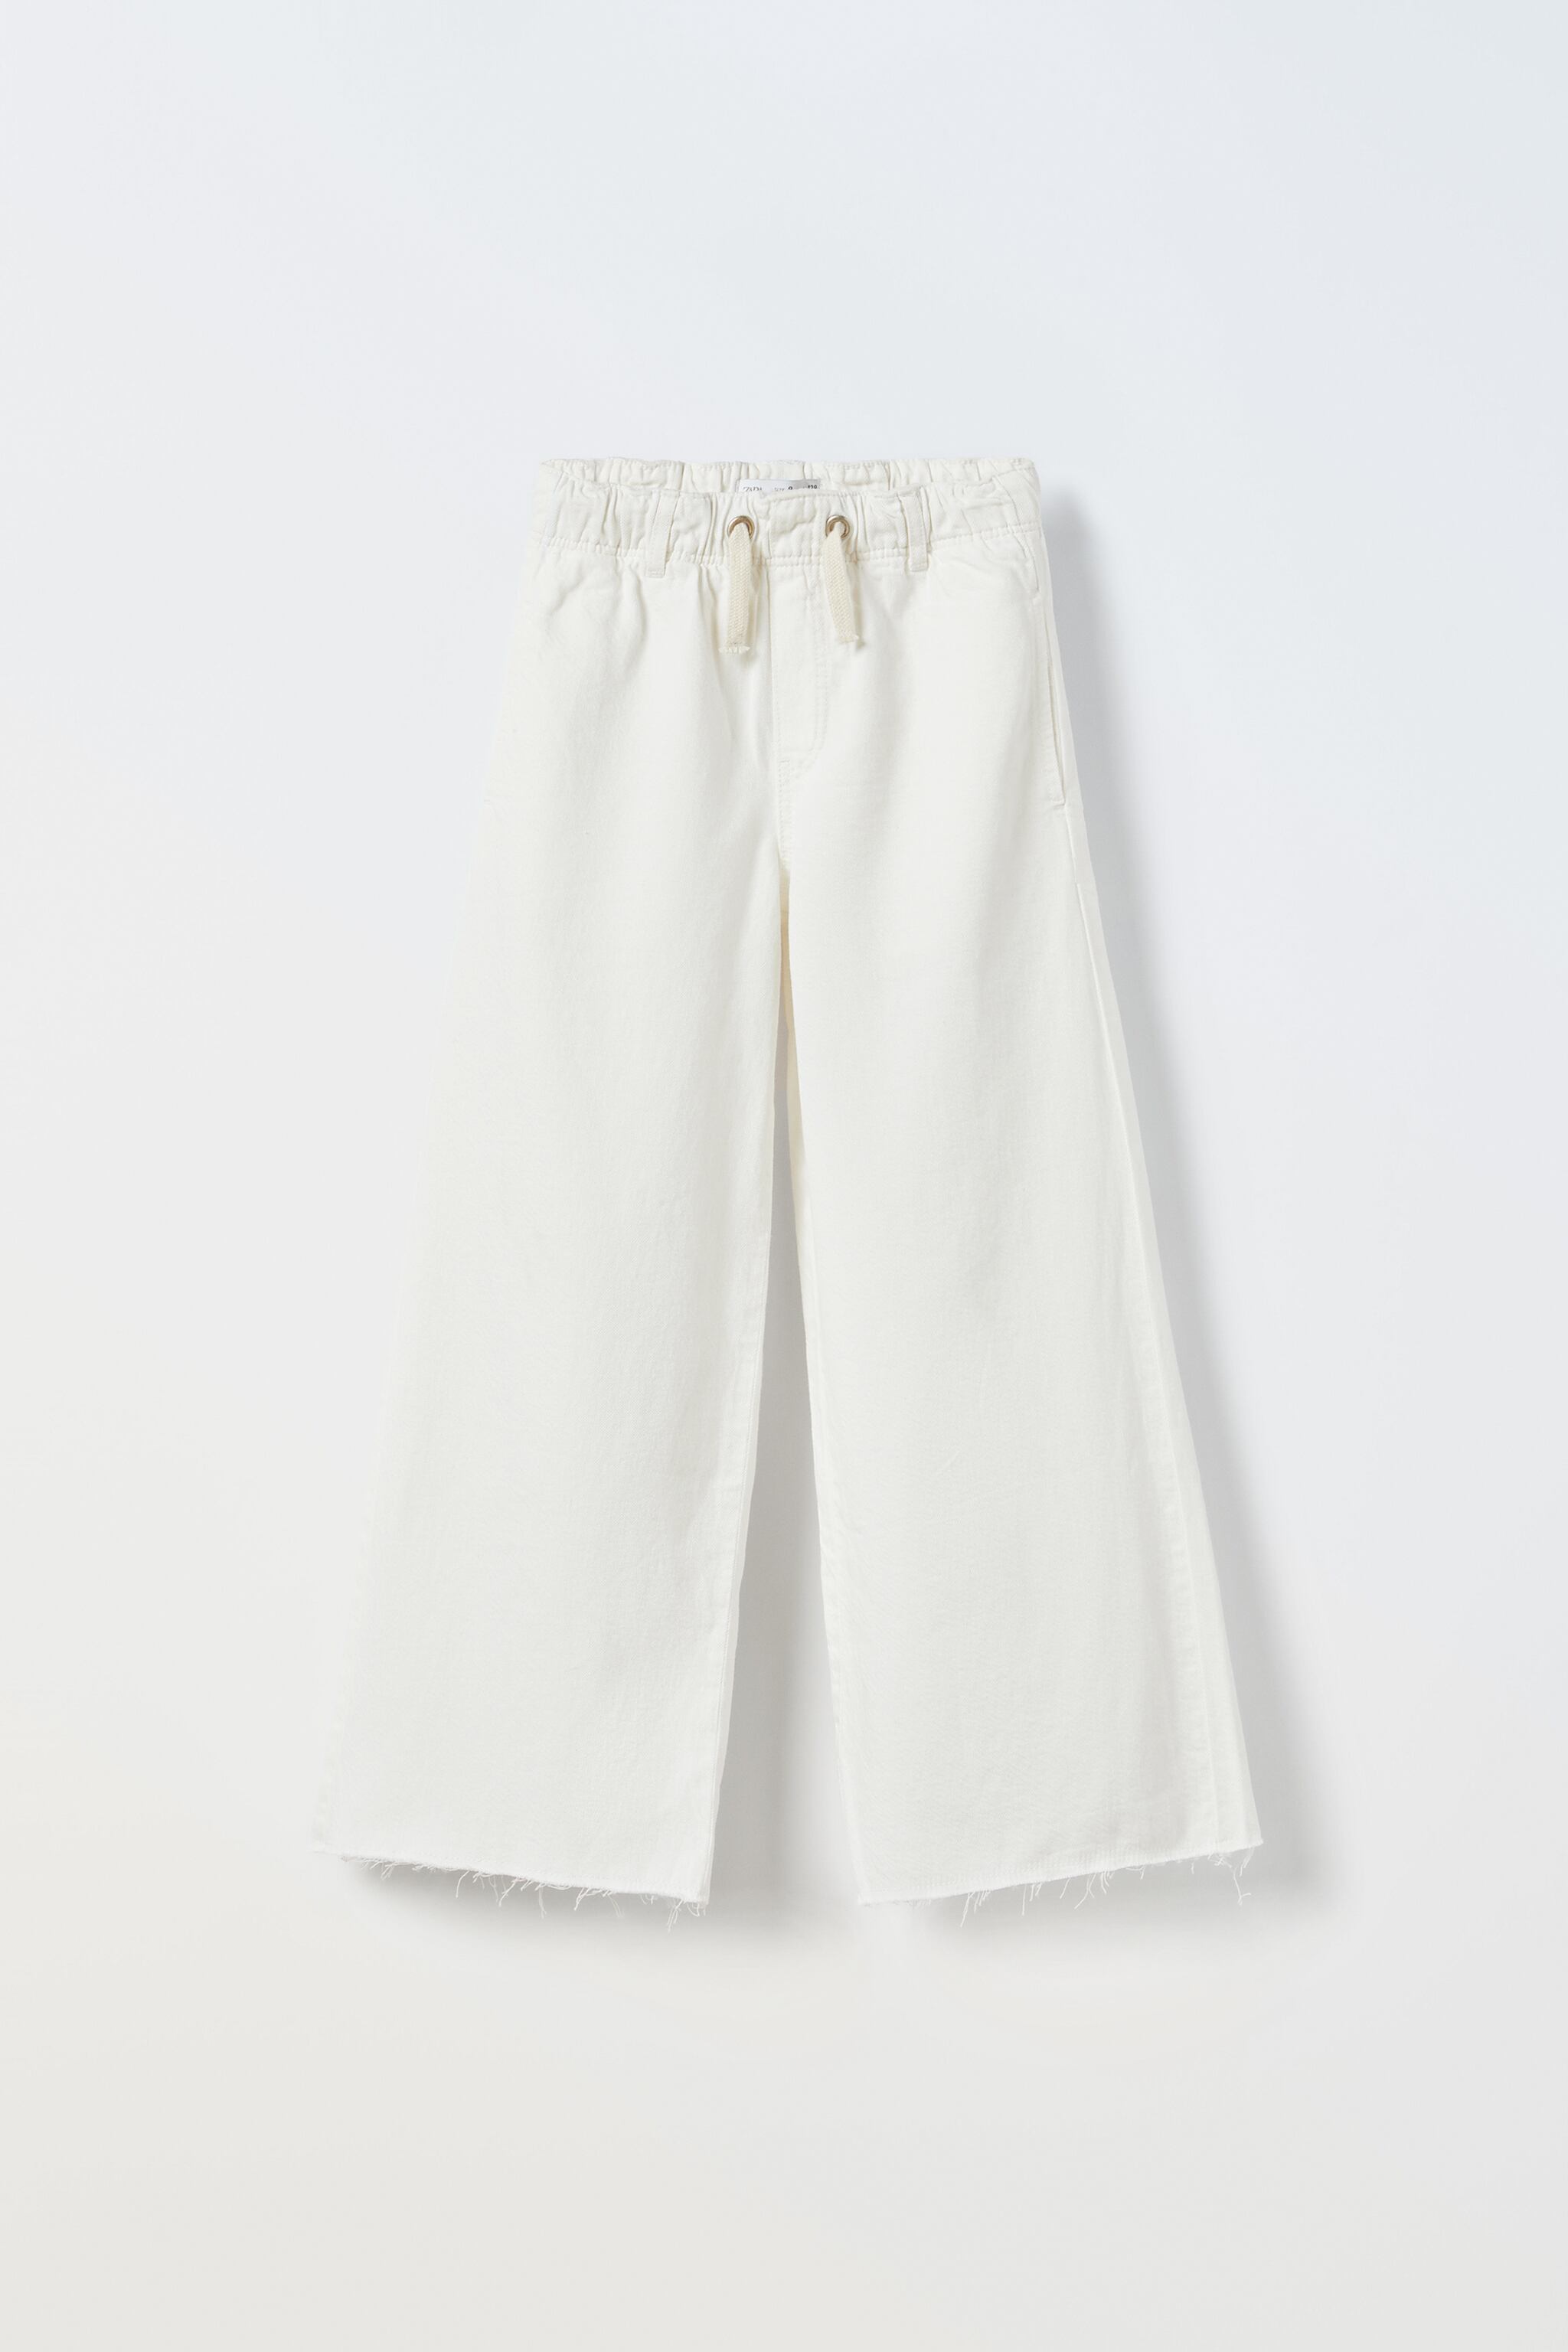 Zara EXTREME FLUID JEANS | Mall of America®